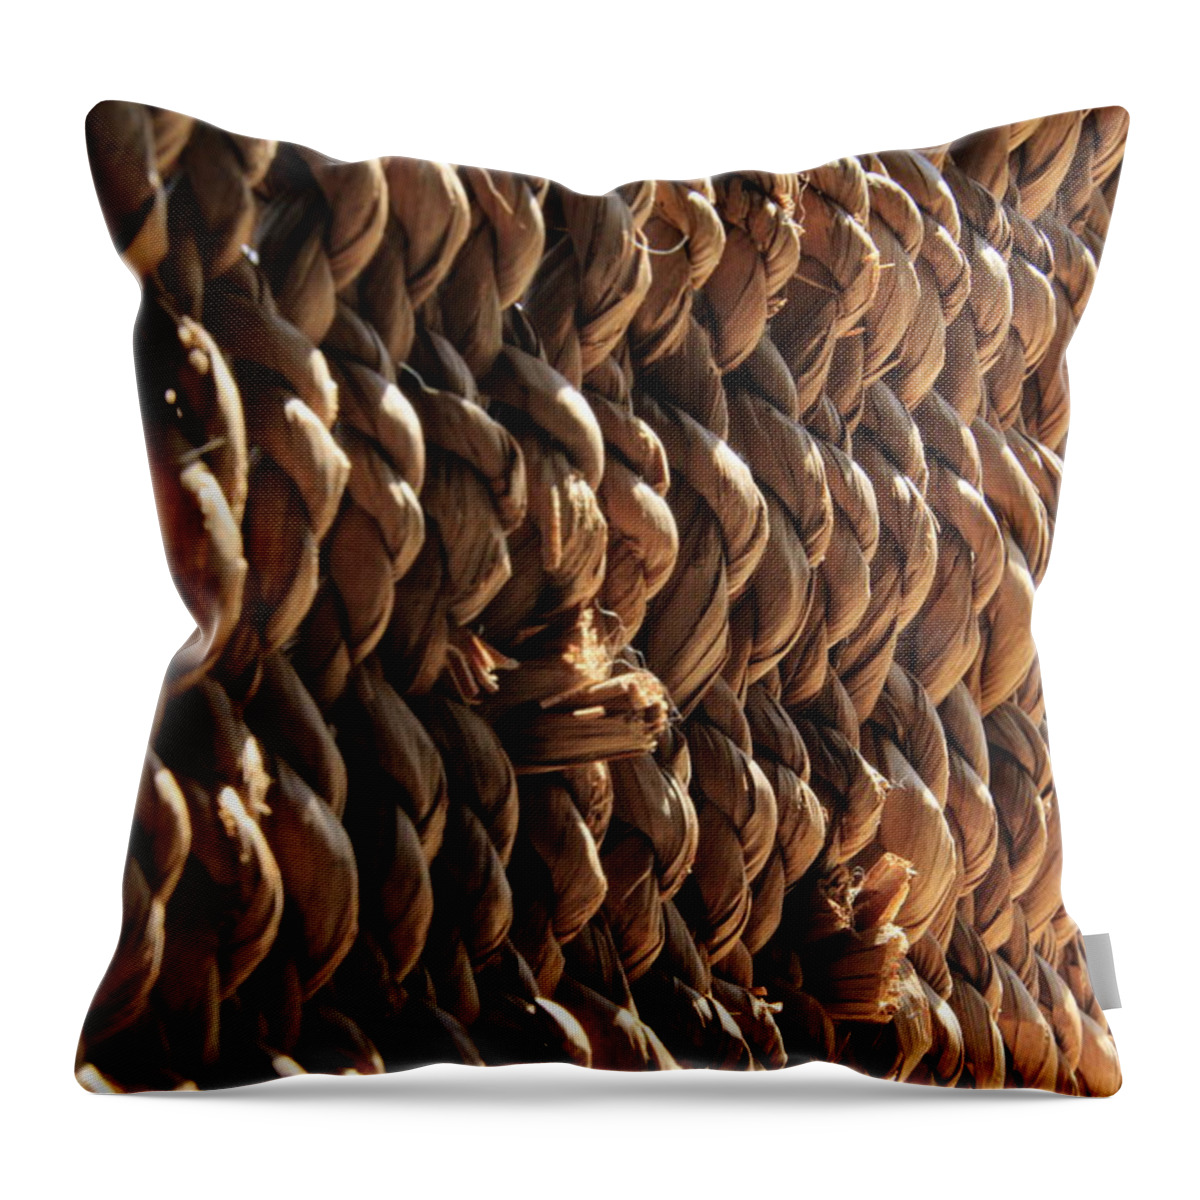 Basket Weave Throw Pillow featuring the photograph Basket Weave by Valerie Collins